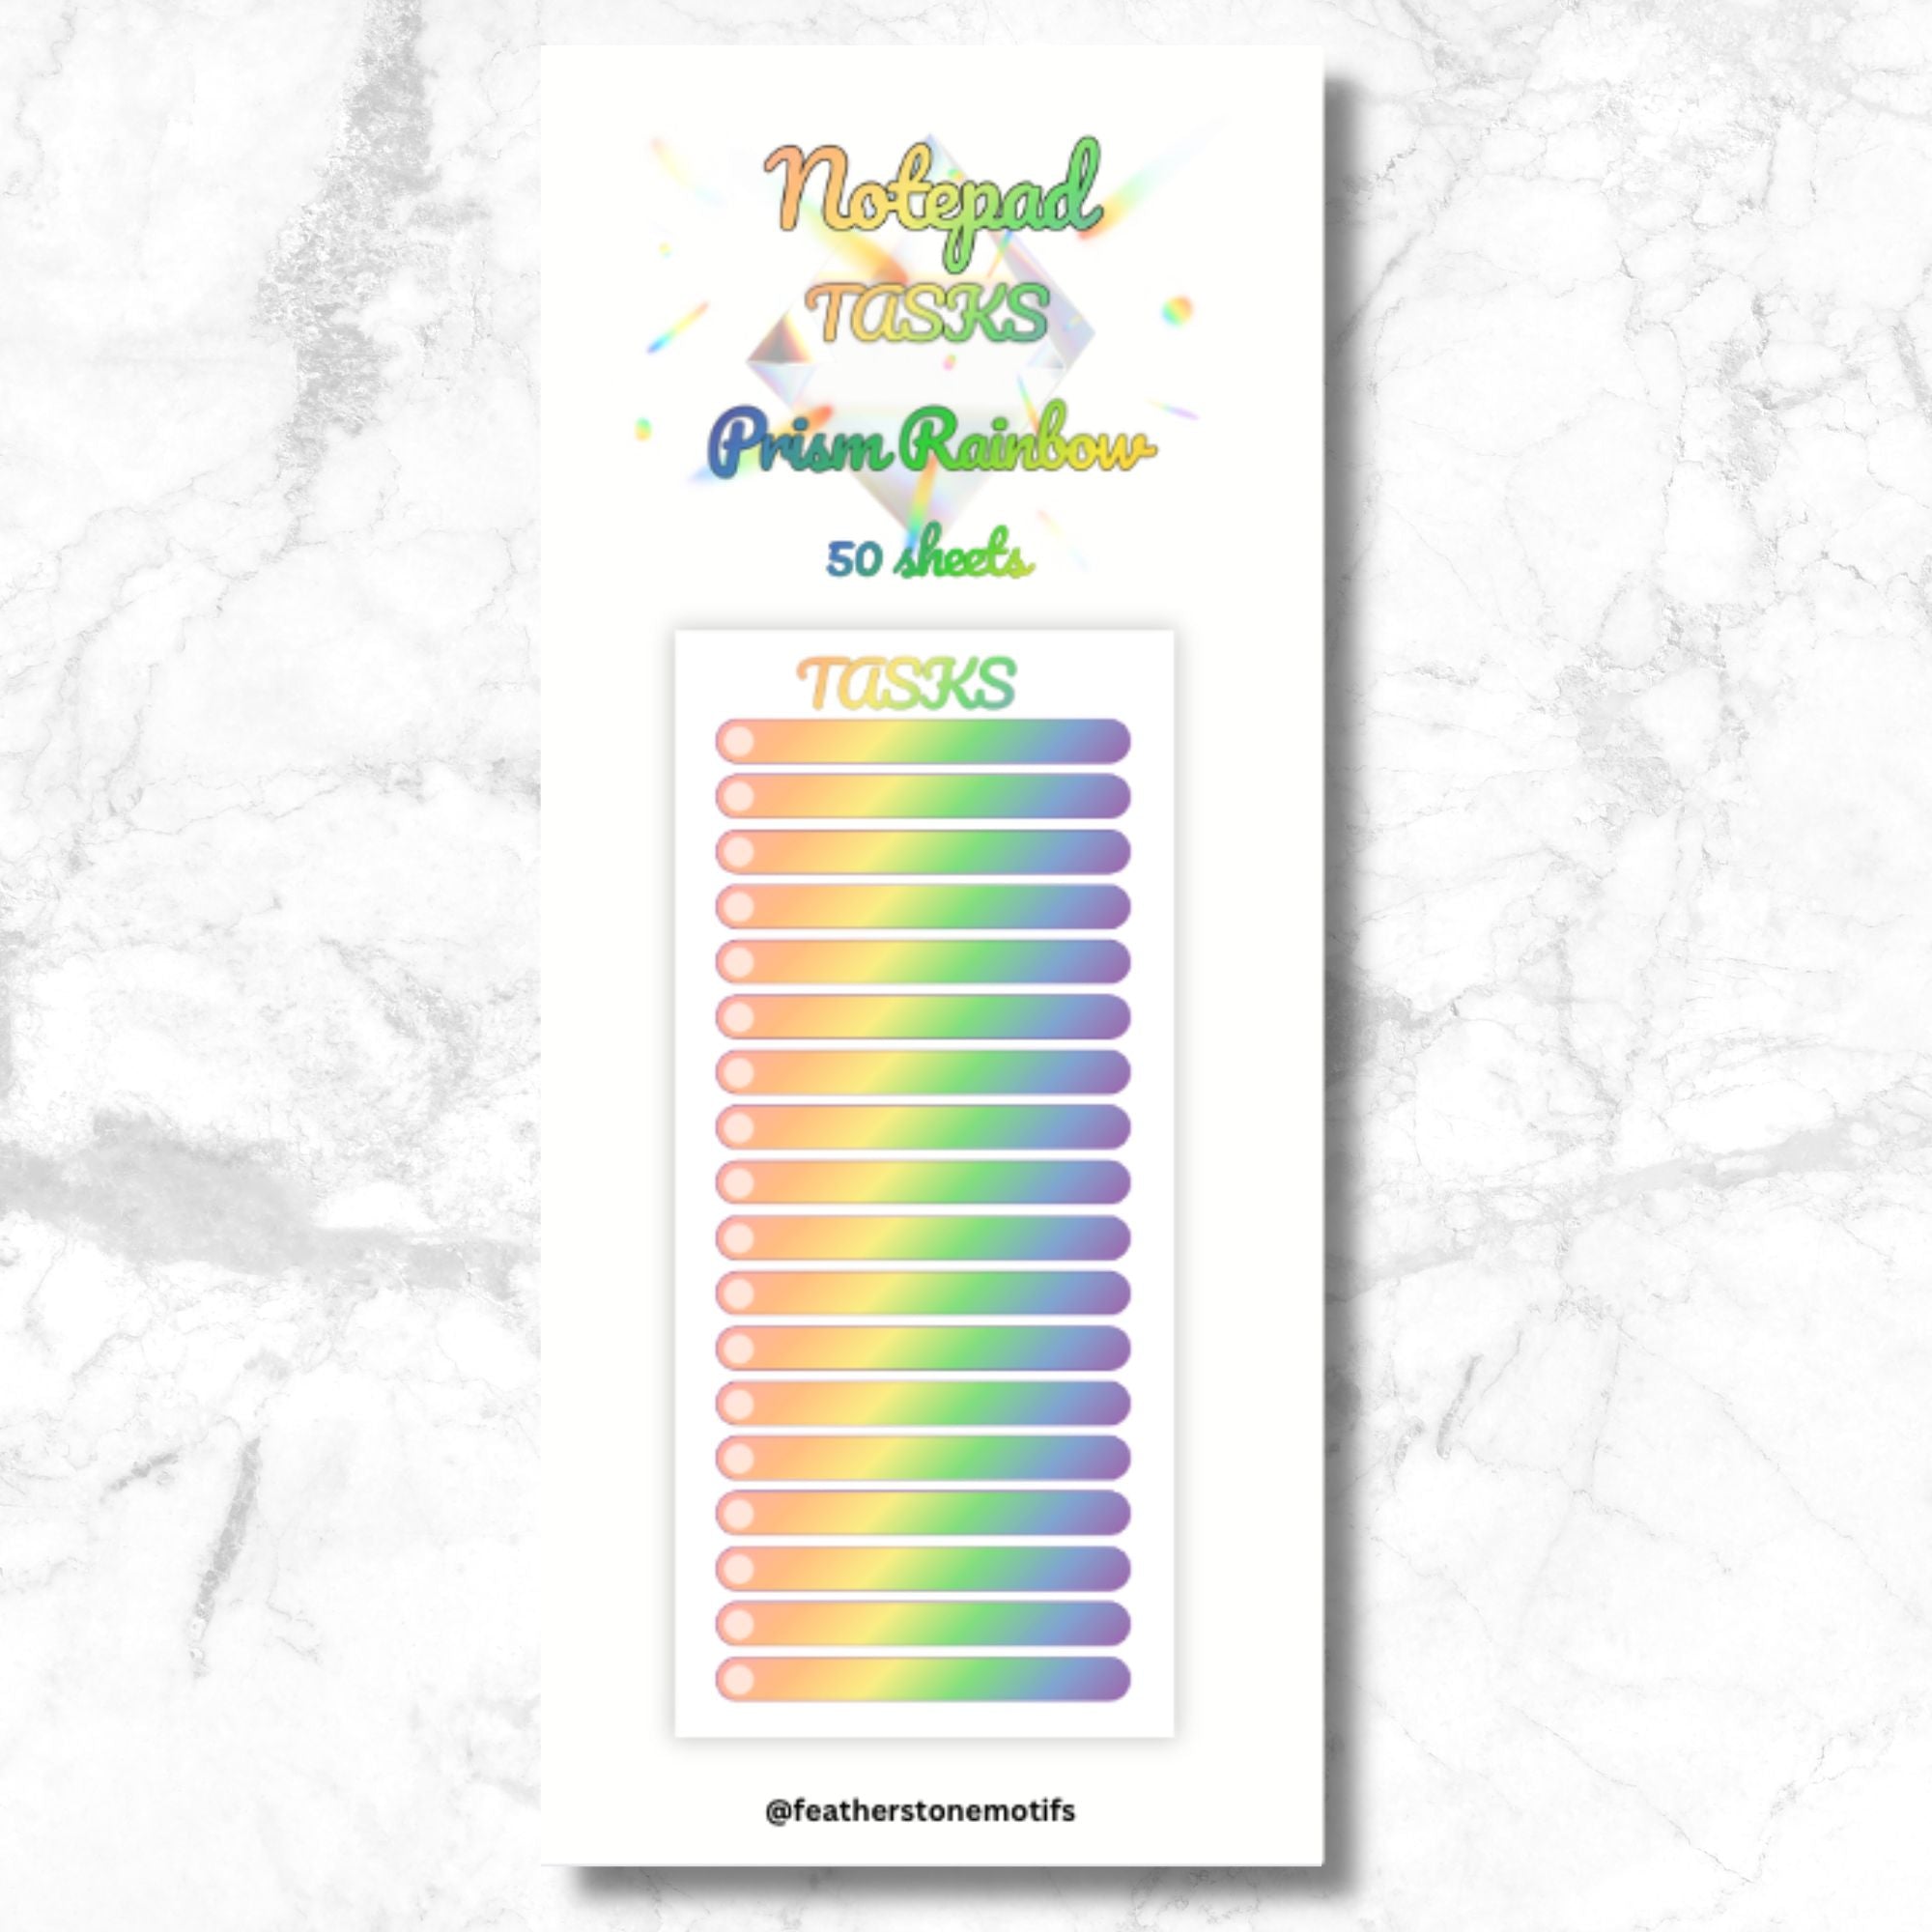 This image shows the cover of the Tasks Notepad - Rainbow Prism.